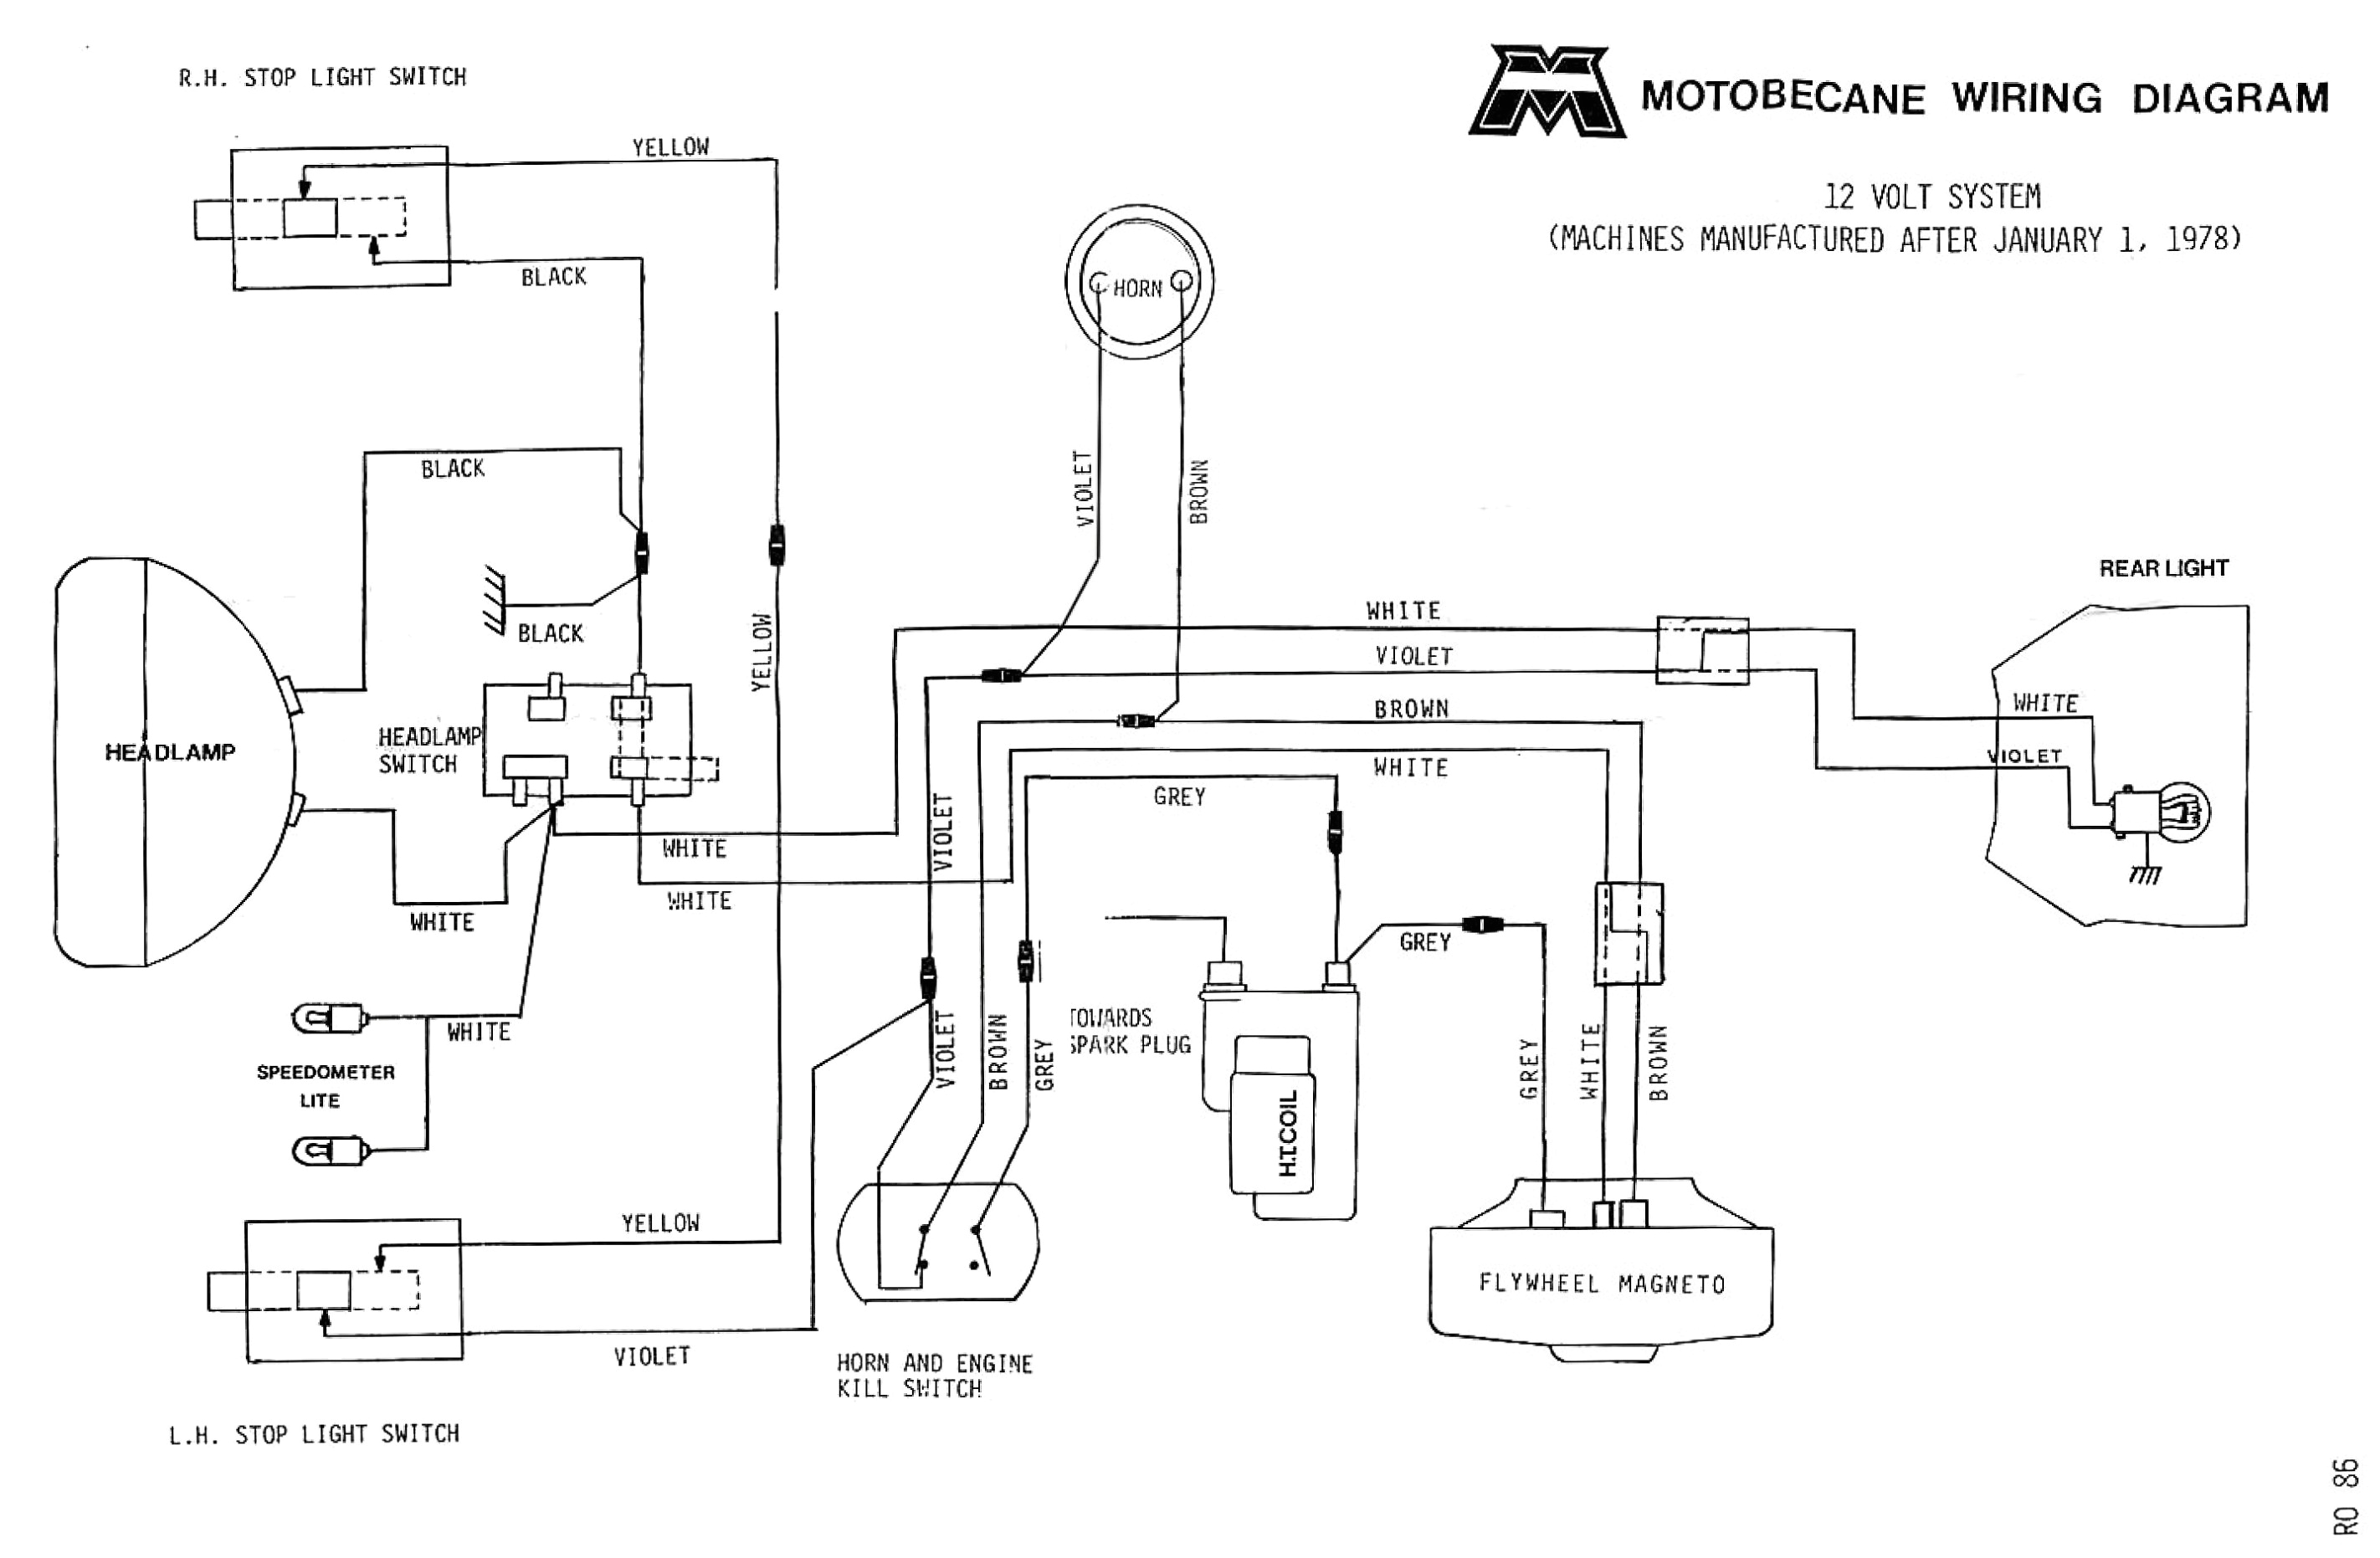 8n ford Tractor Wiring Diagram 12 Volt 1956 ford Tractor Wiring Diagram Free Download Wiring Diagrams